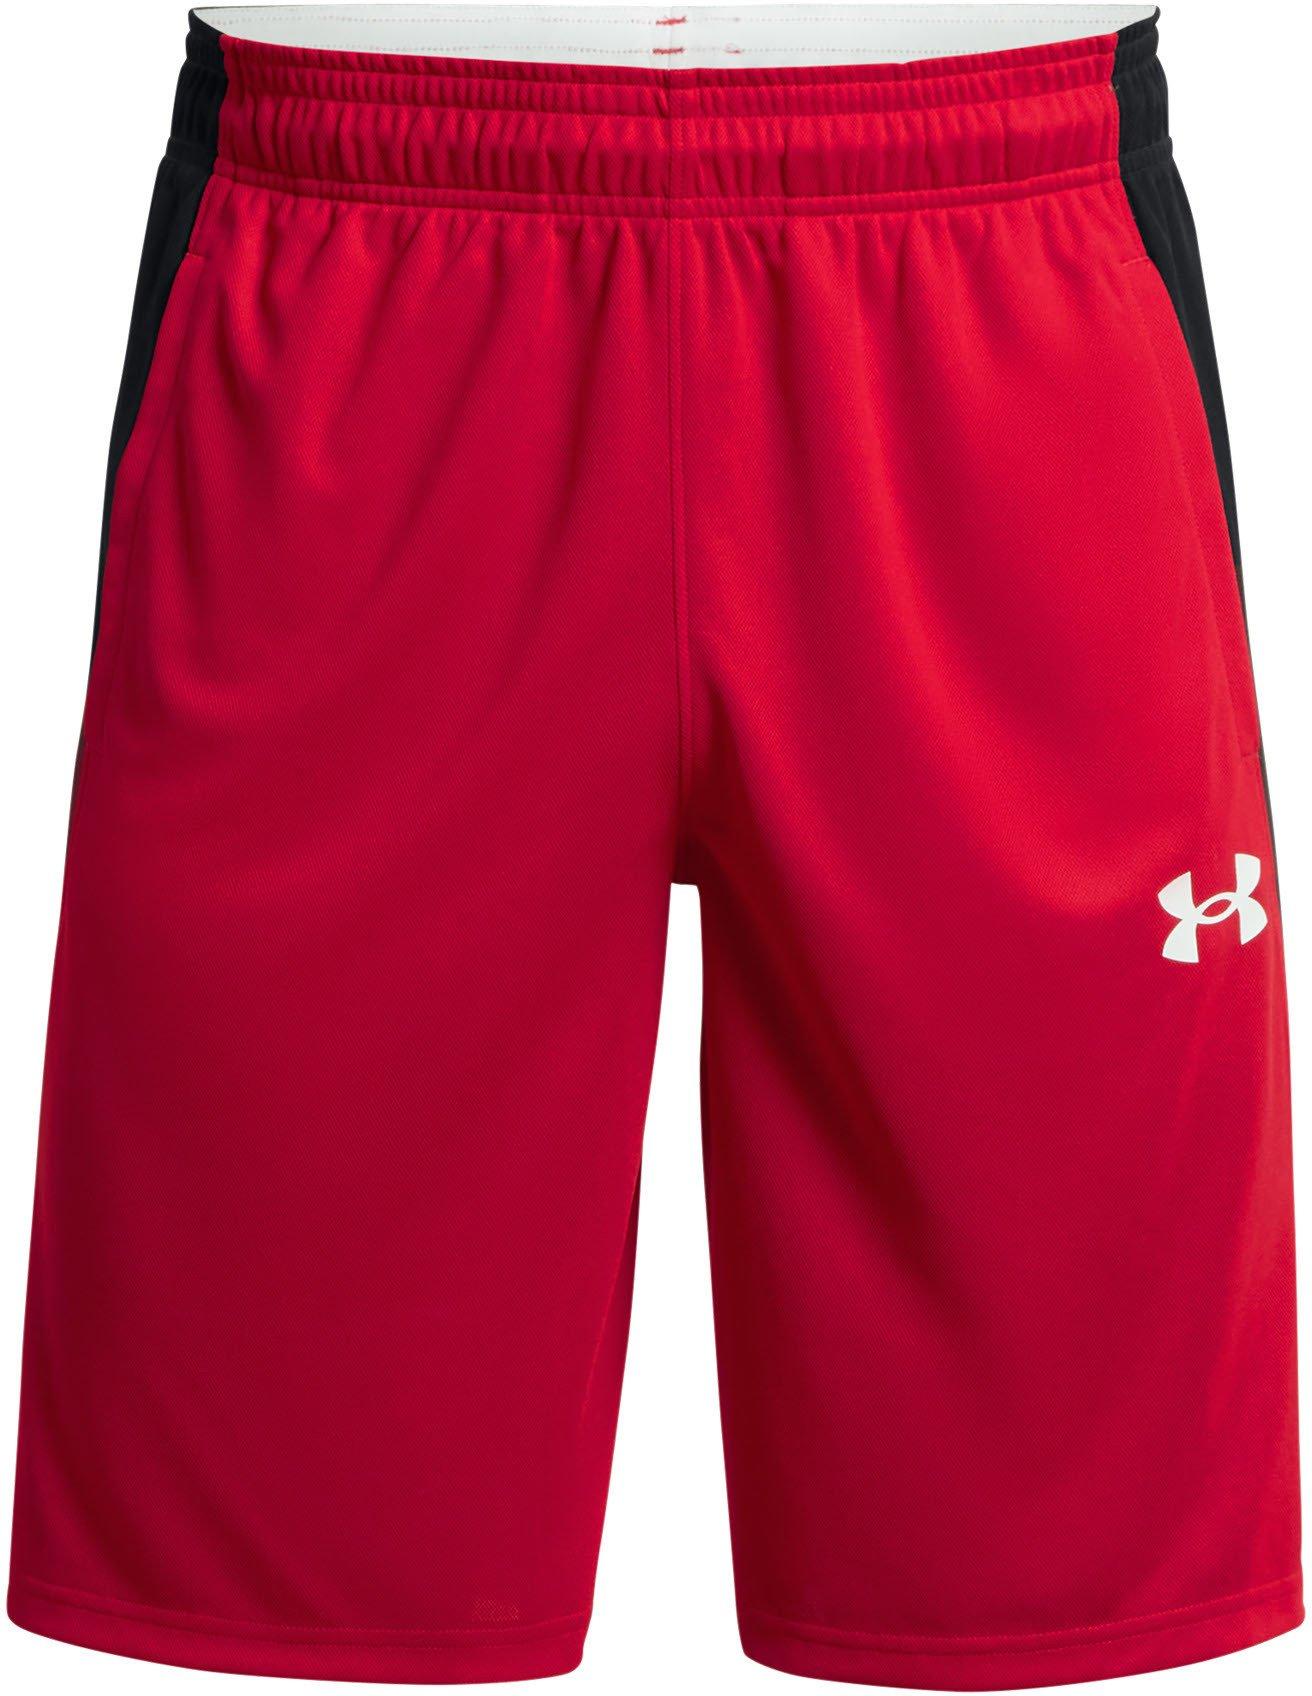 Under Armour BASELINE 10'' SHORT-RED M